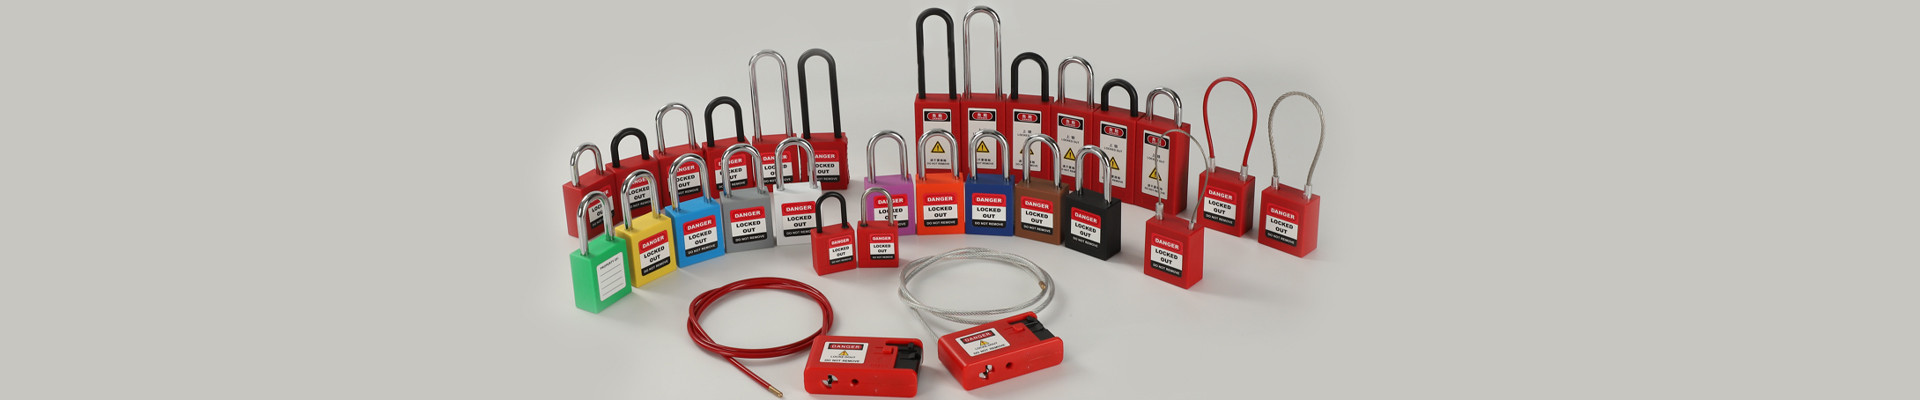 electrical lockout devices for safety